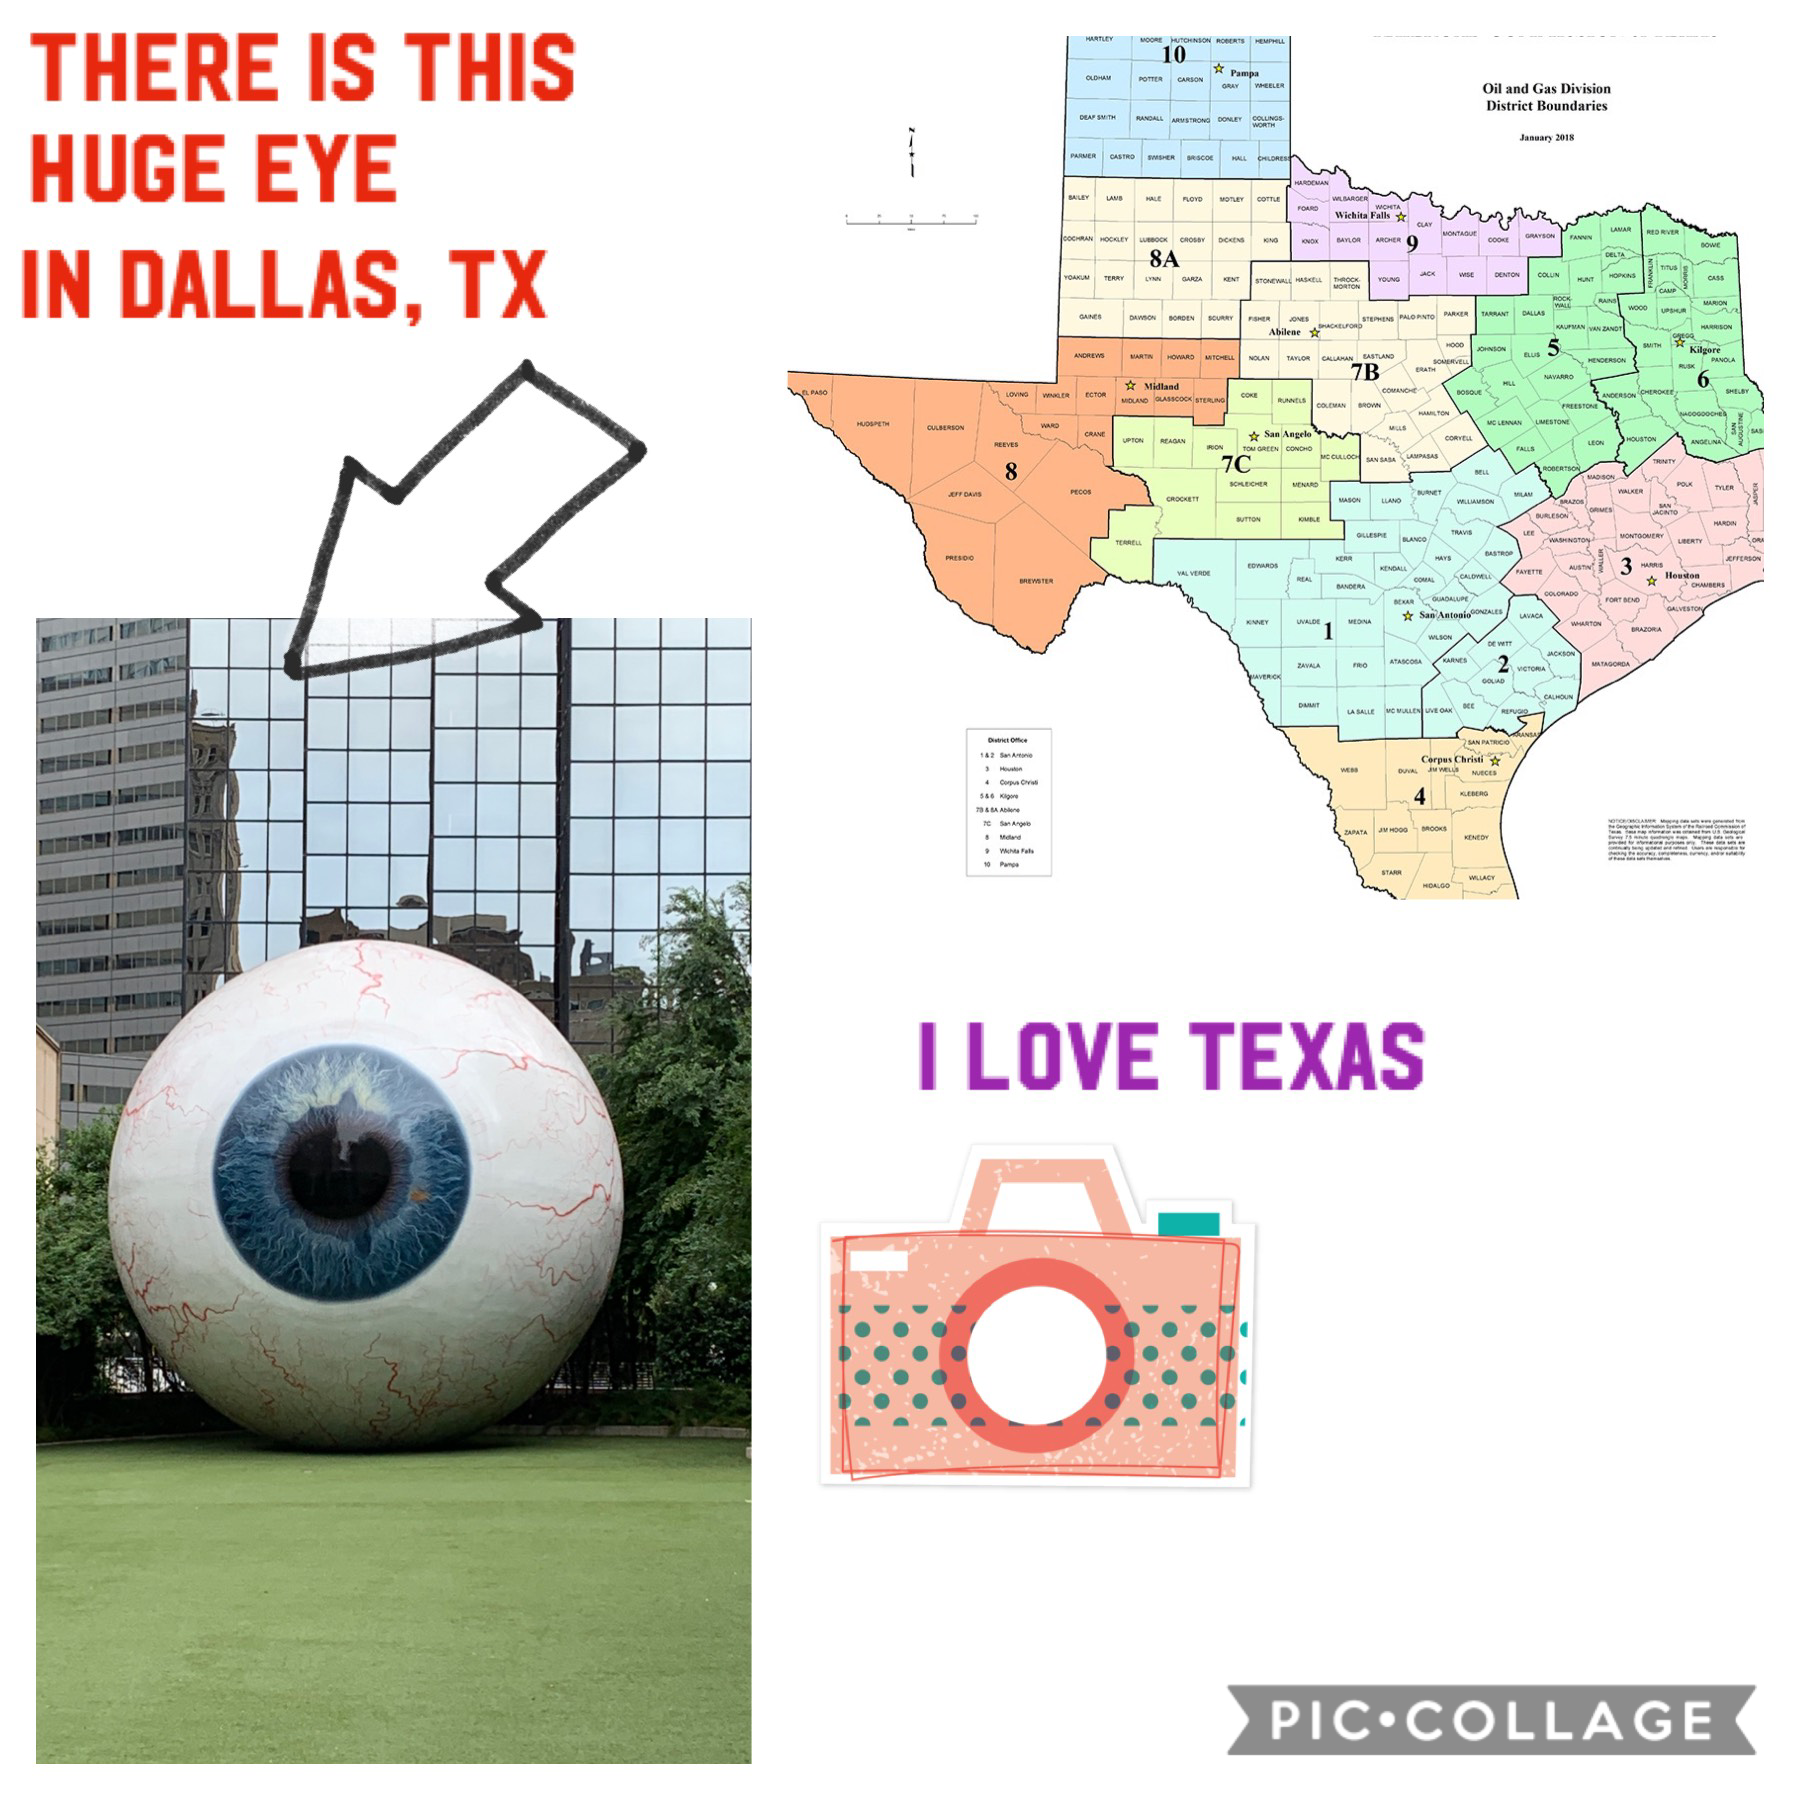 Have you ever been to Texas?? 